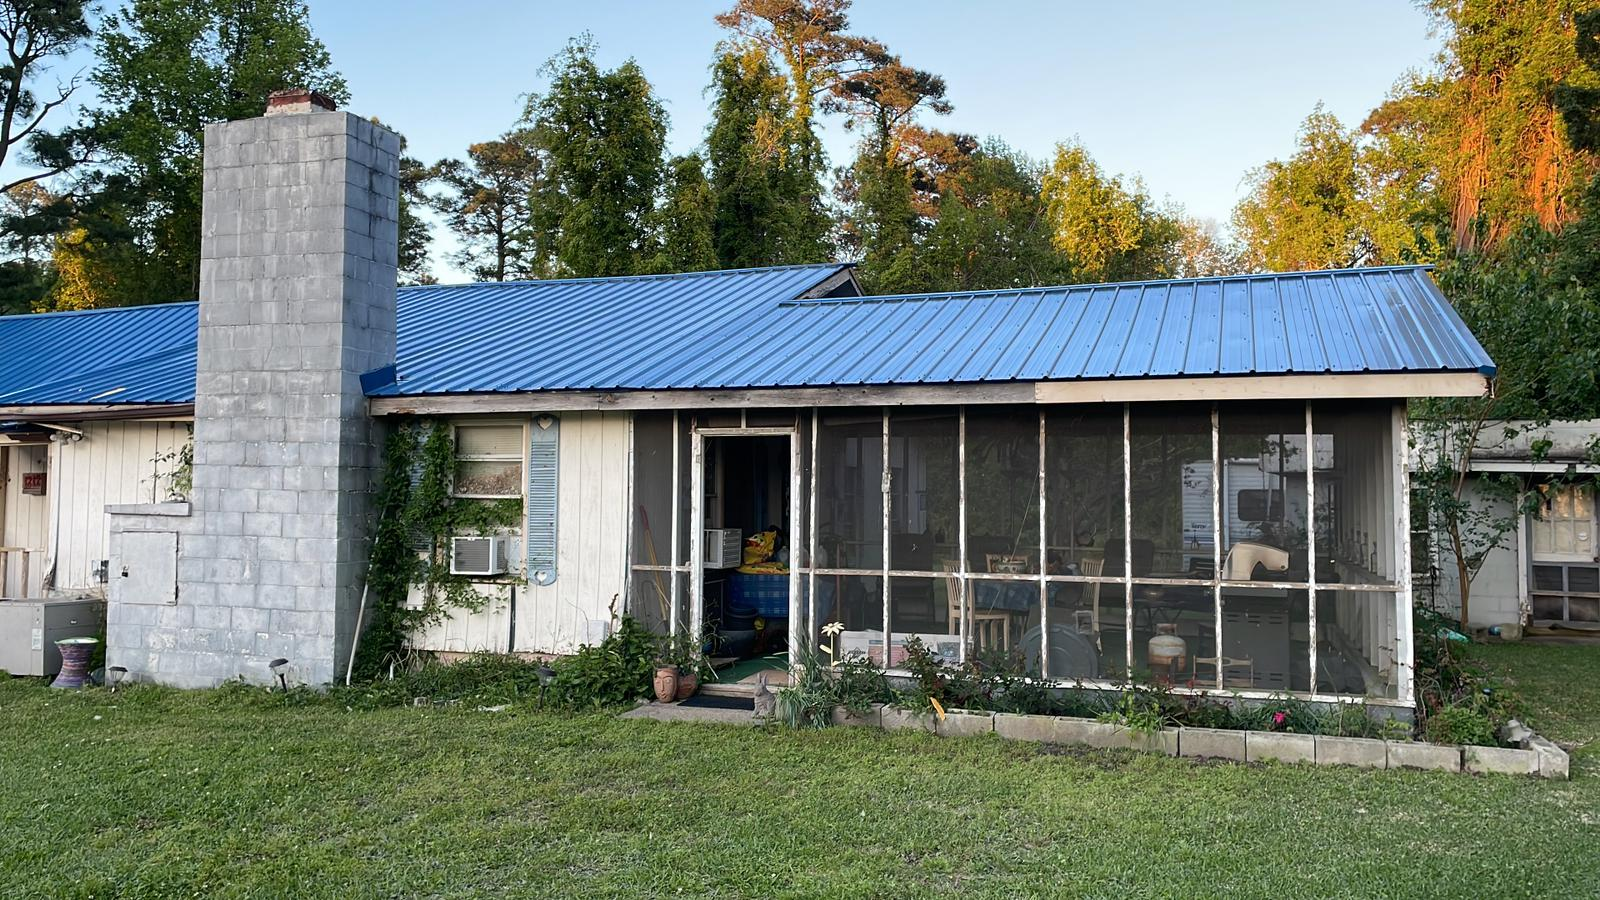 An image of a house with a metal roof